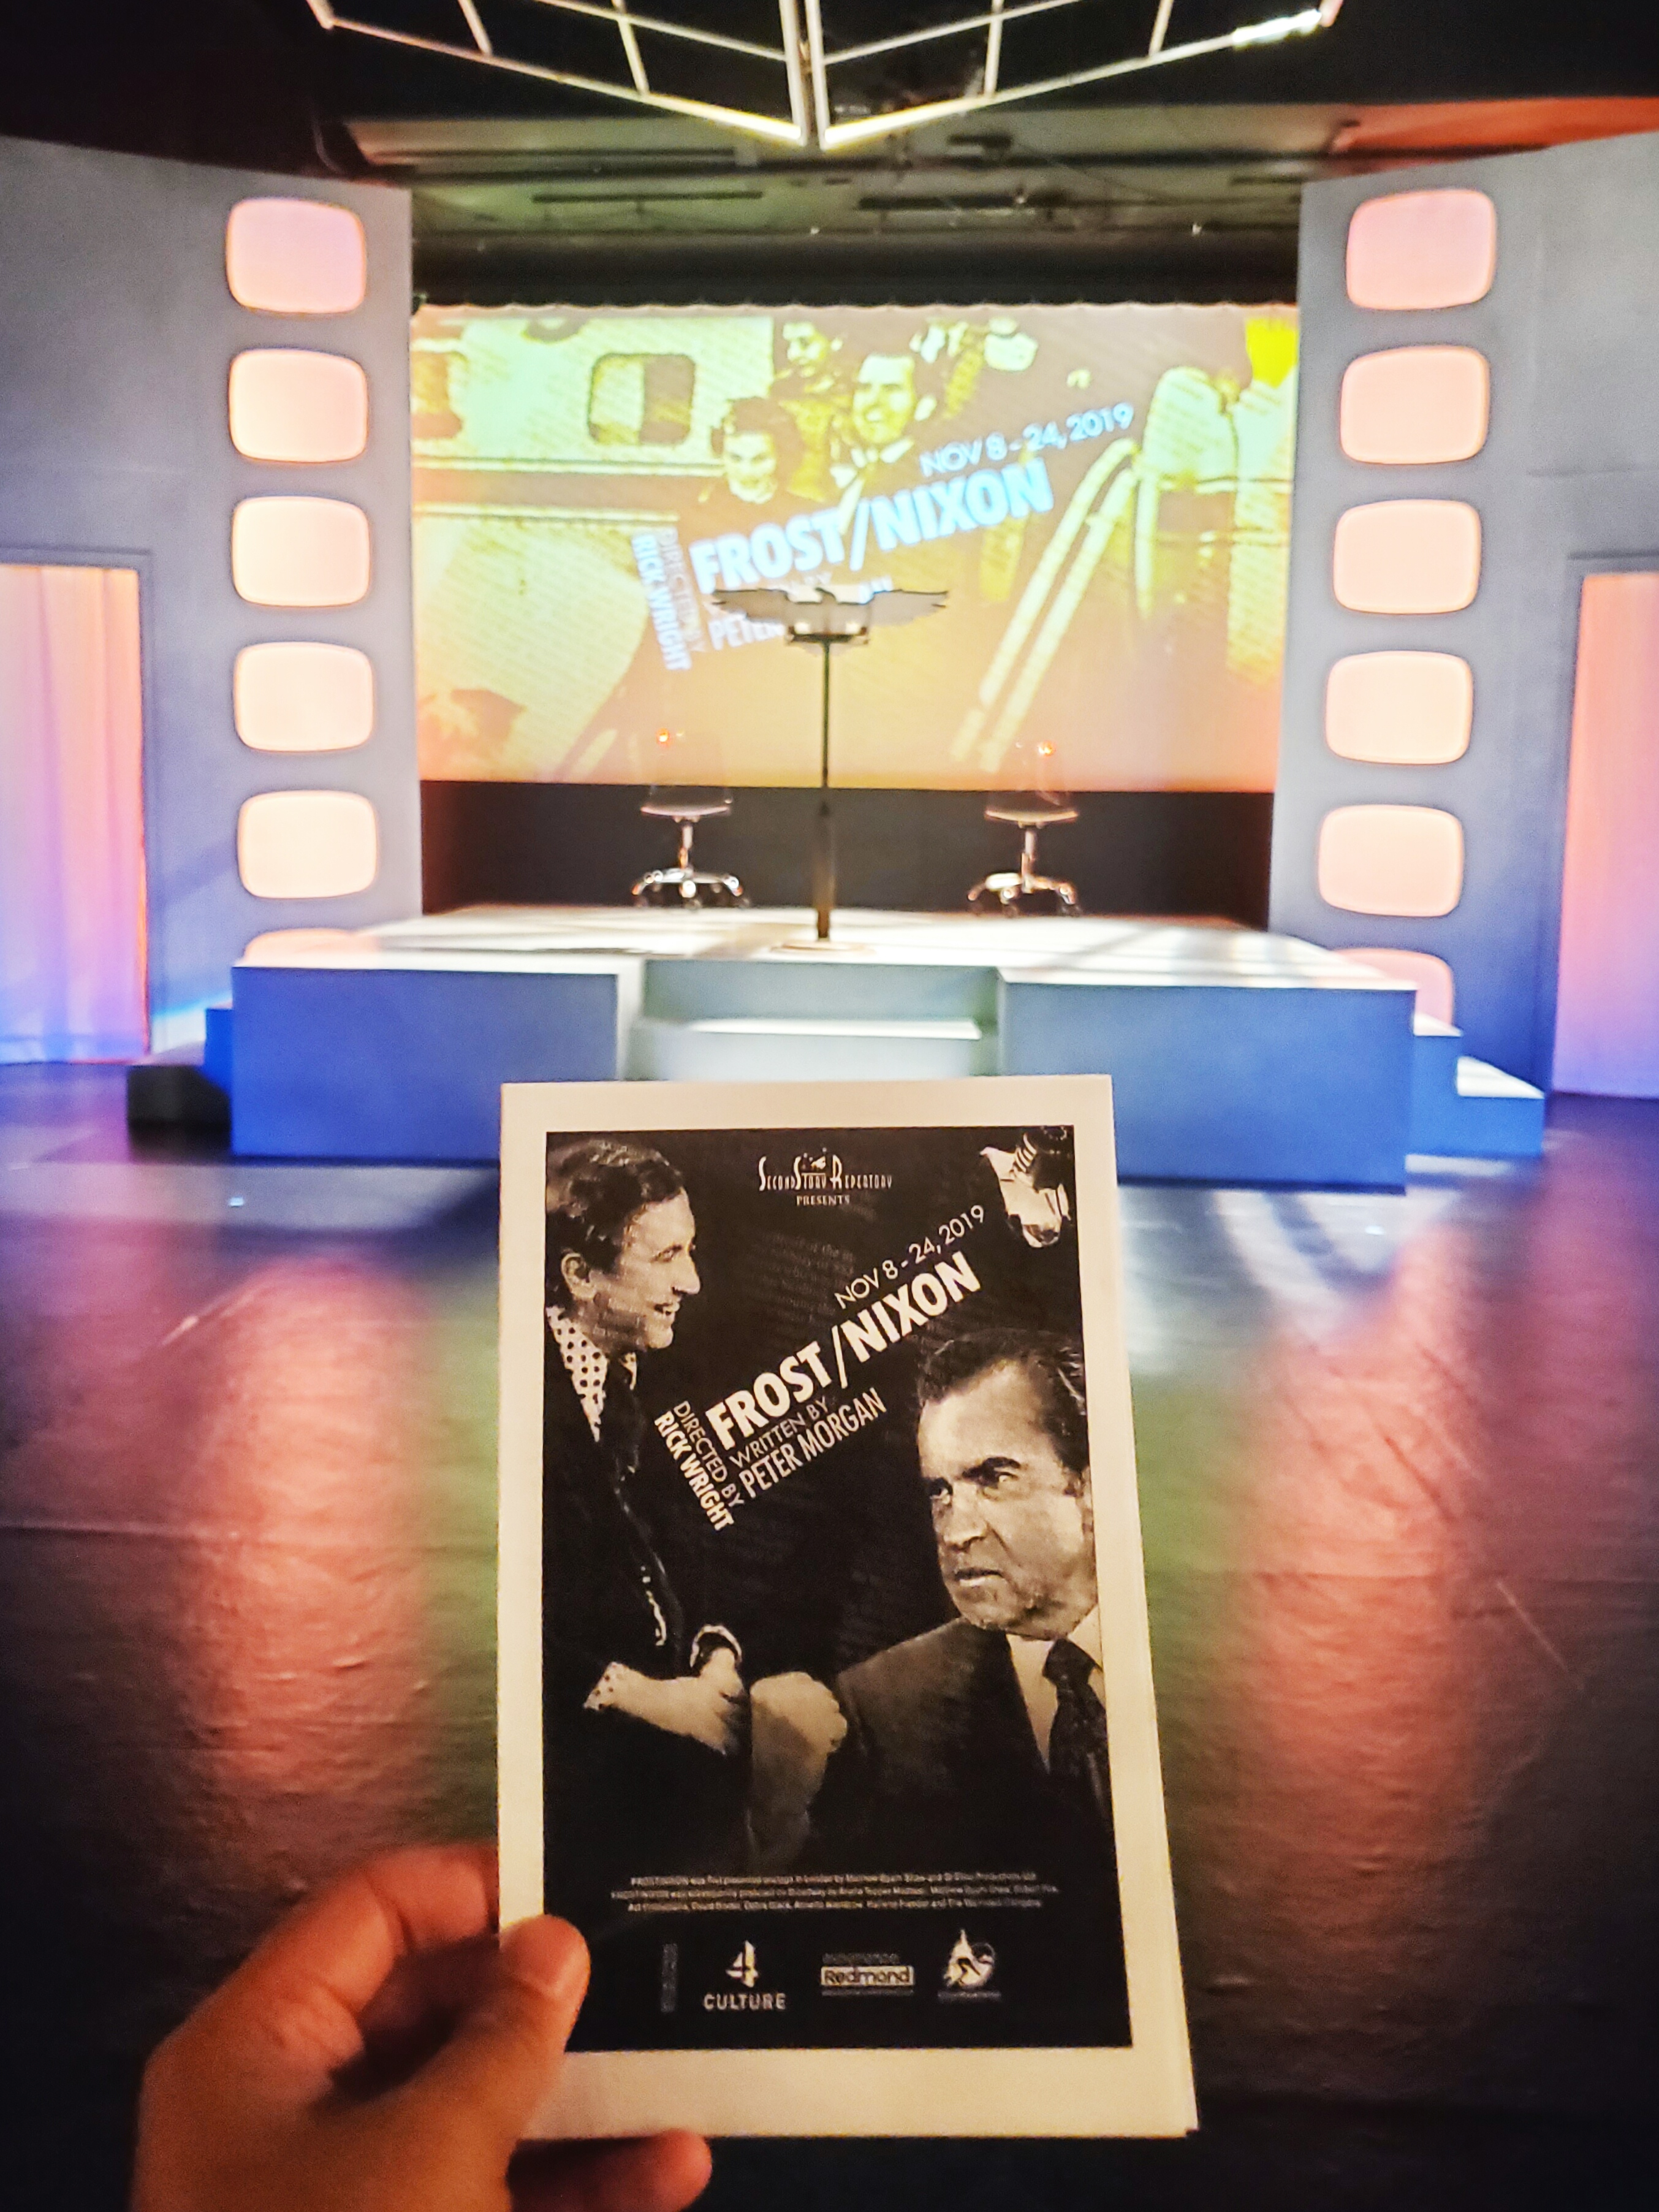 Frost / Nixon at SecondStory Repertory w/ dad. Interesting dramatic portrayal of a potentially dry topic. Timely #play considering the #impeachment inquiry against the current #president. #Watergate #Nixon #politics #scandal #impeach